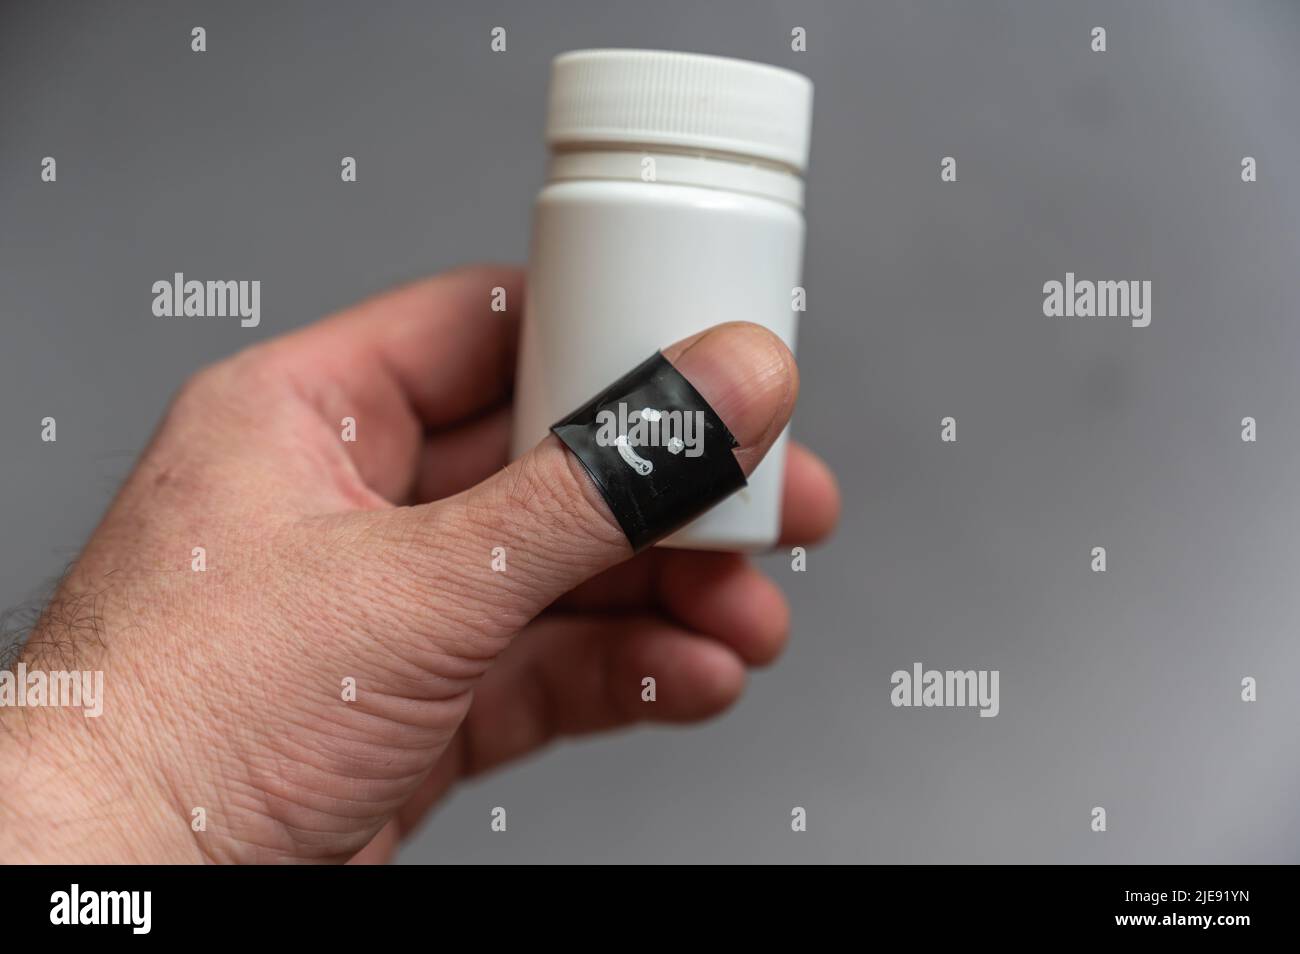 Middle-aged man holds white medicine or vitamin vial in his hand. Phalanx his thumb wrapped around black electrical tape. Happy, smiling face is paint Stock Photo